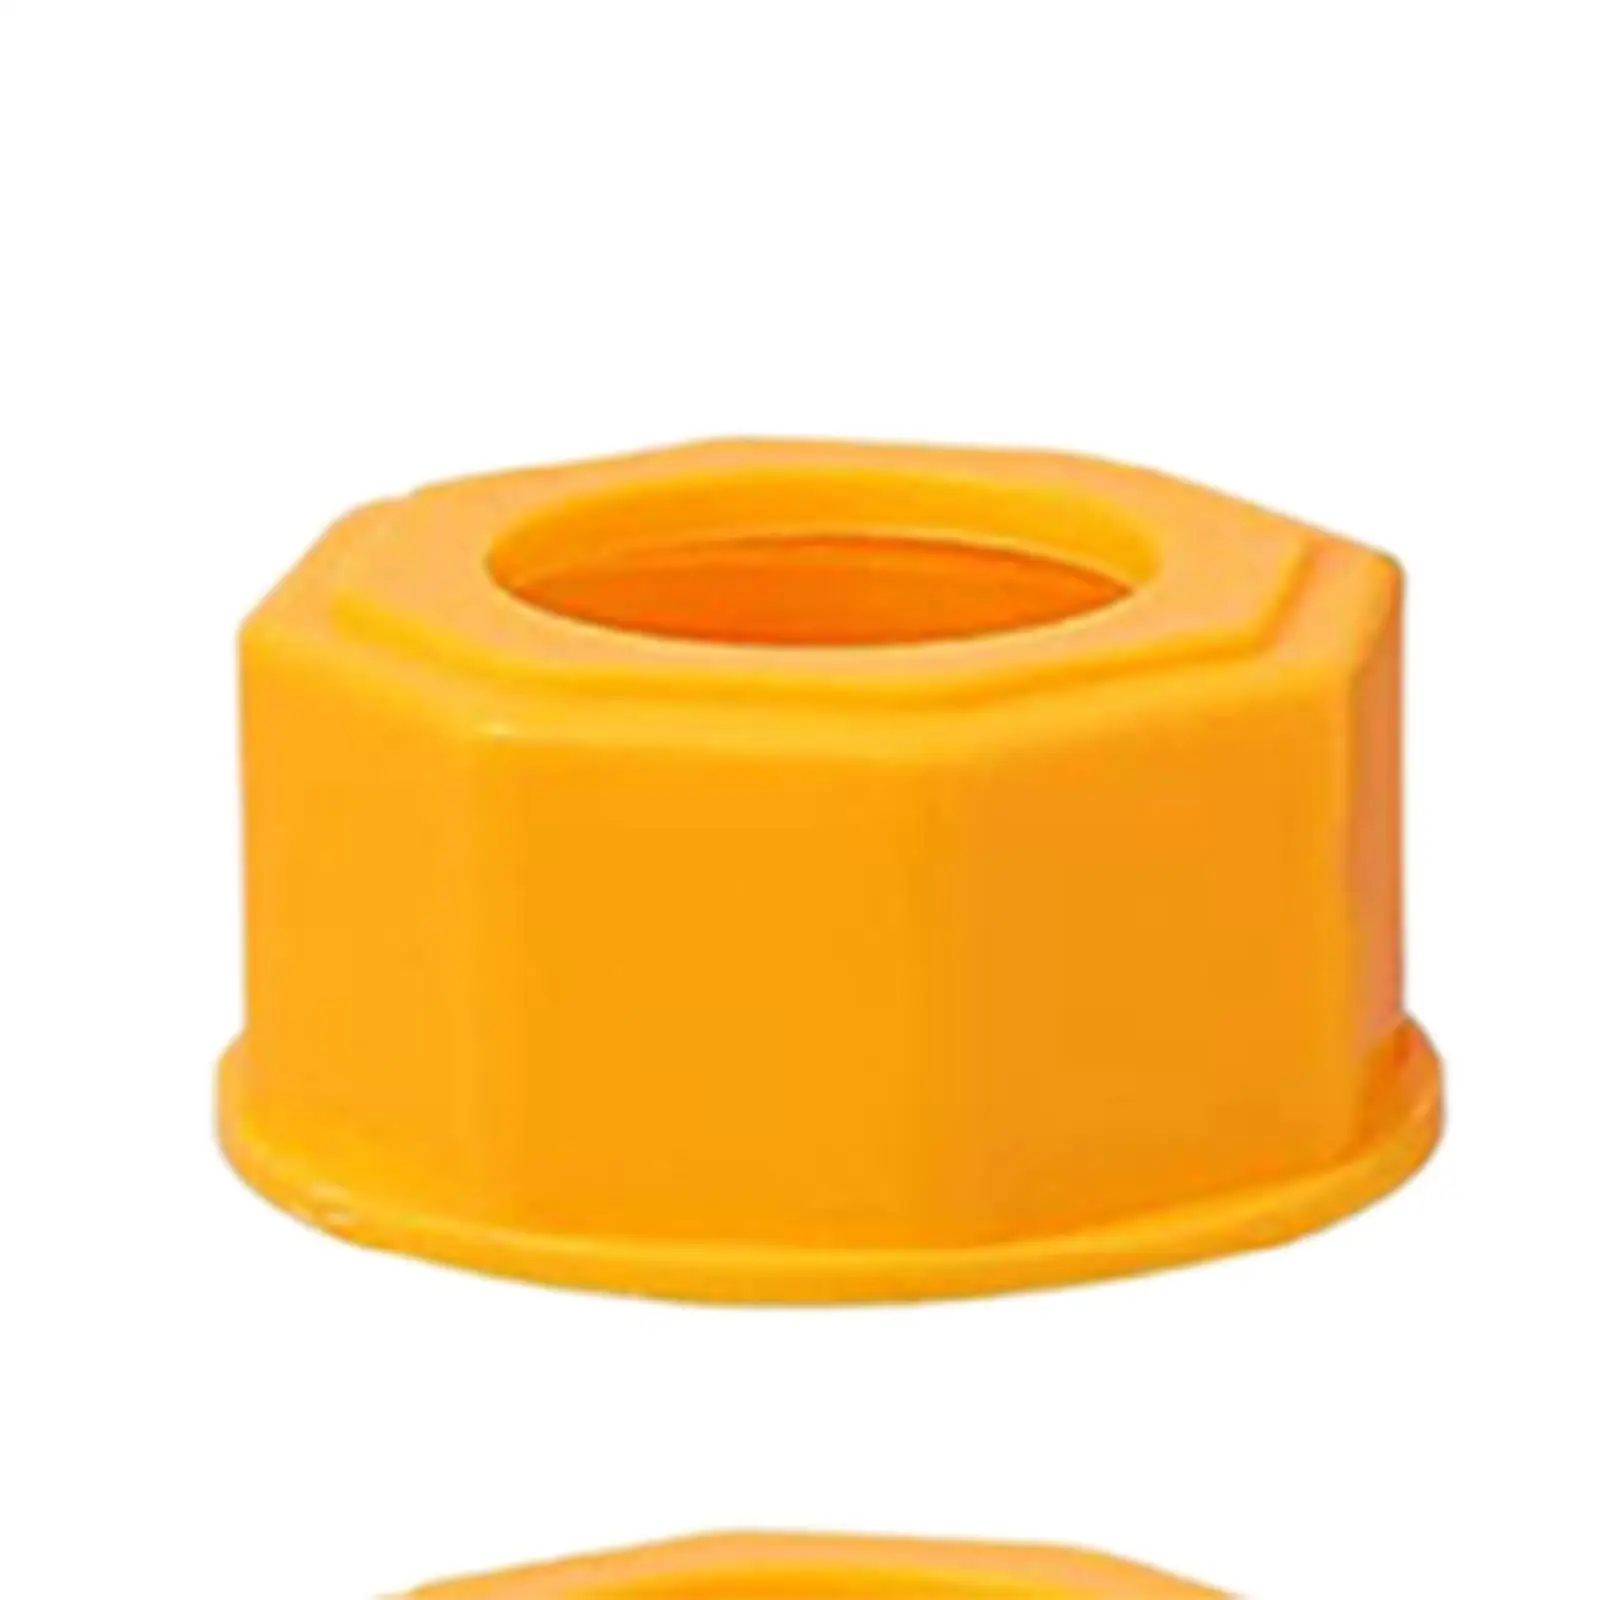 Gas Can Spout Replacement Multipurpose Sealing Caps Sturdy Upgrade No Leakage for Petrol Cans Industrial Machinery Accessories